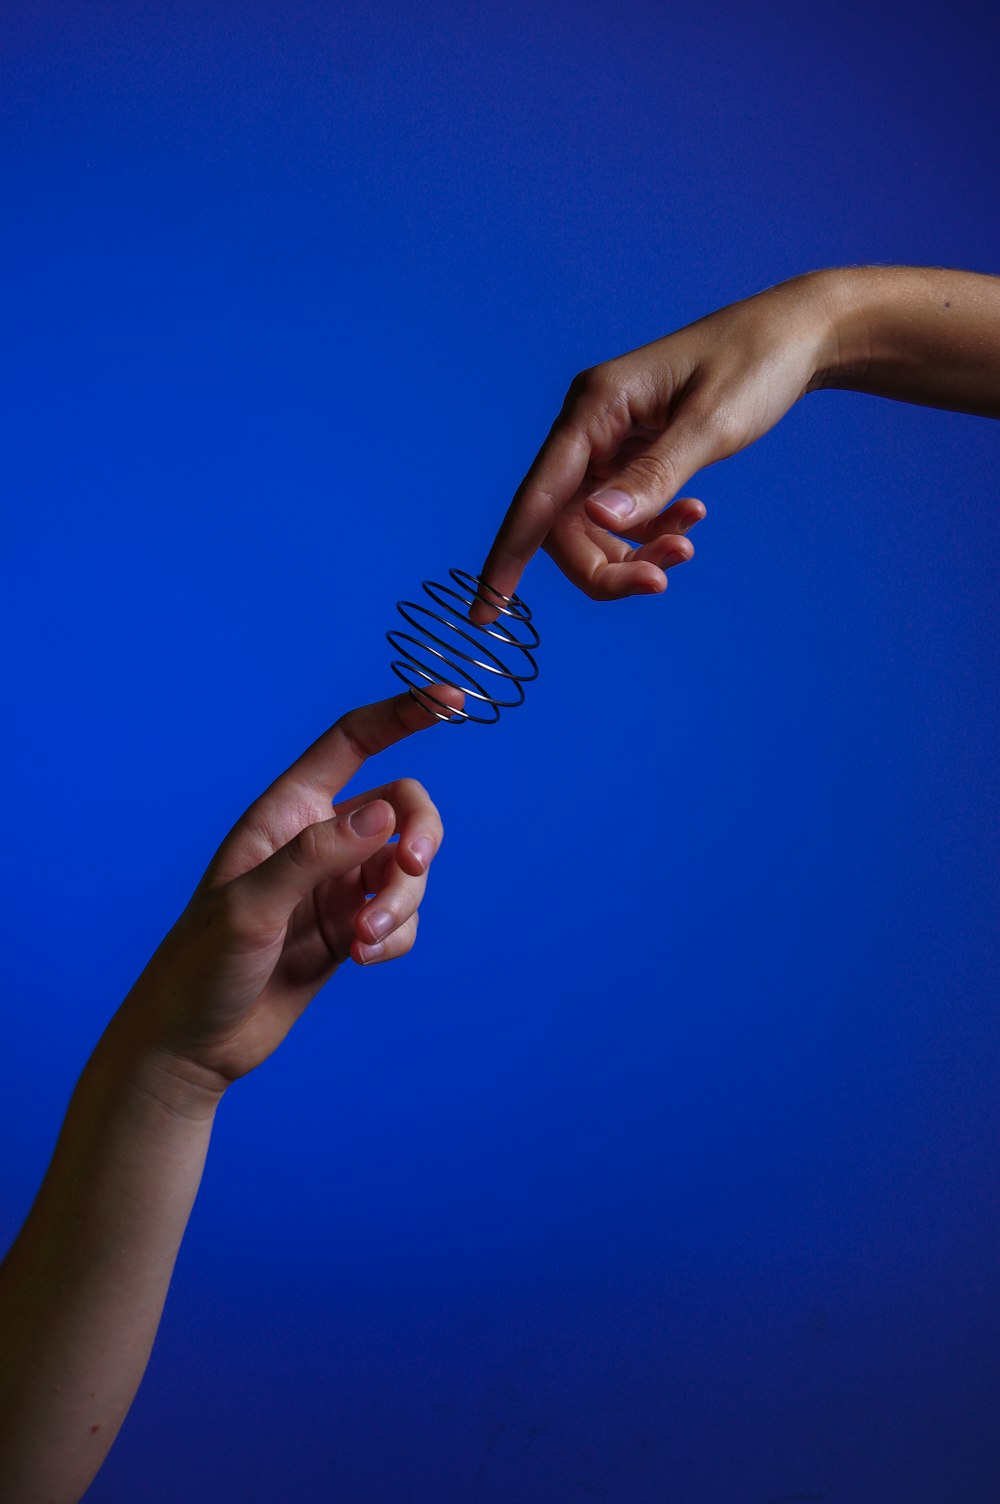 two hands reaching for a spiral object against a blue background